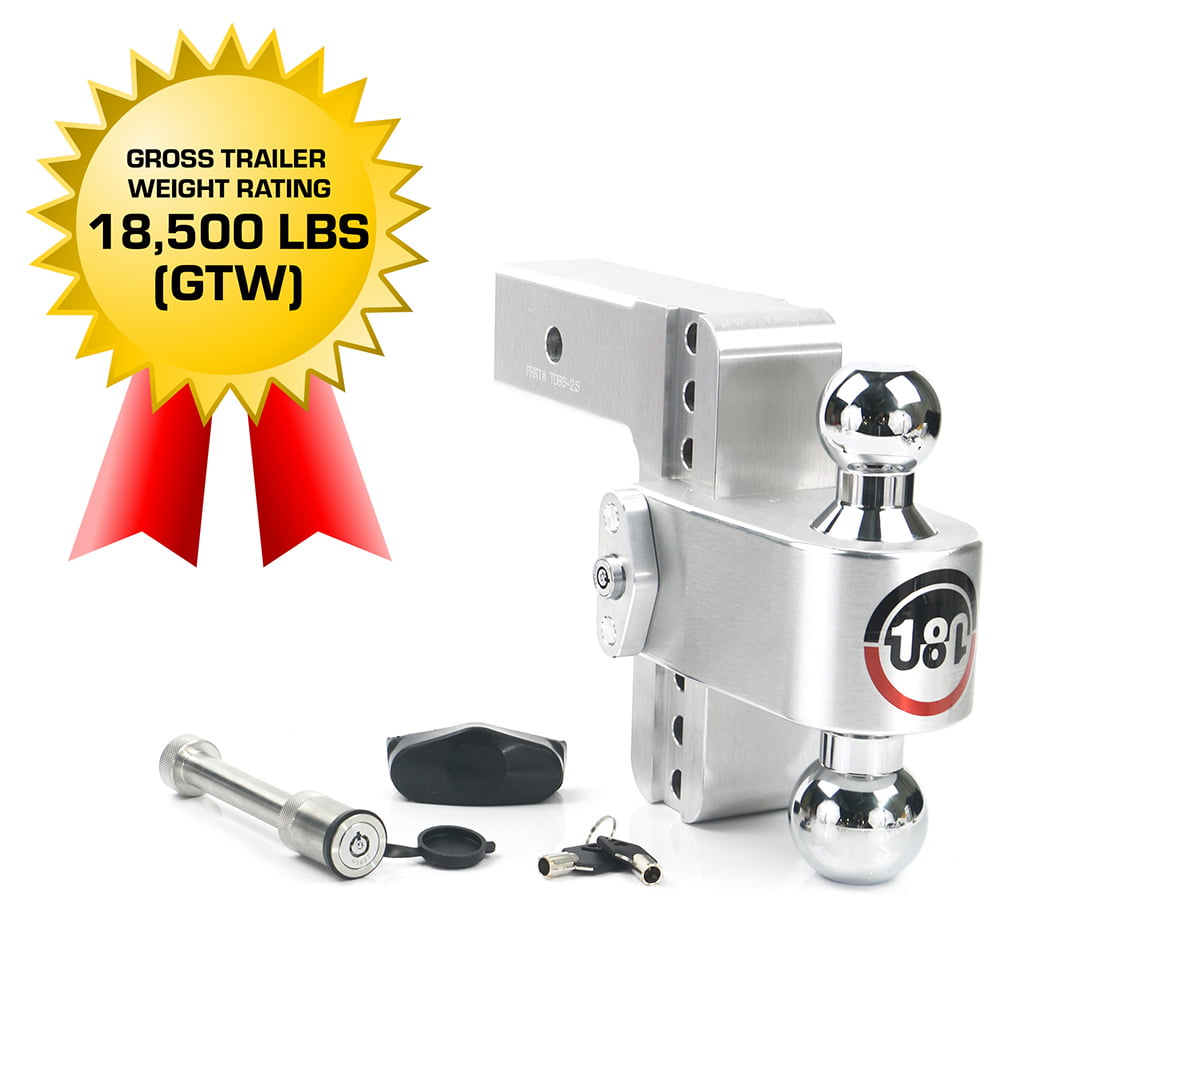 Adjustable Aluminum Trailer Hitch & Ball Mount 2 & 2-5/16 Weigh Safe CTB6-2.5 and a Double-pin Key Lock 6 Drop 180 Hitch w/ 2.5 Shank/Shaft Chrome Plated Steel Combo Ball 